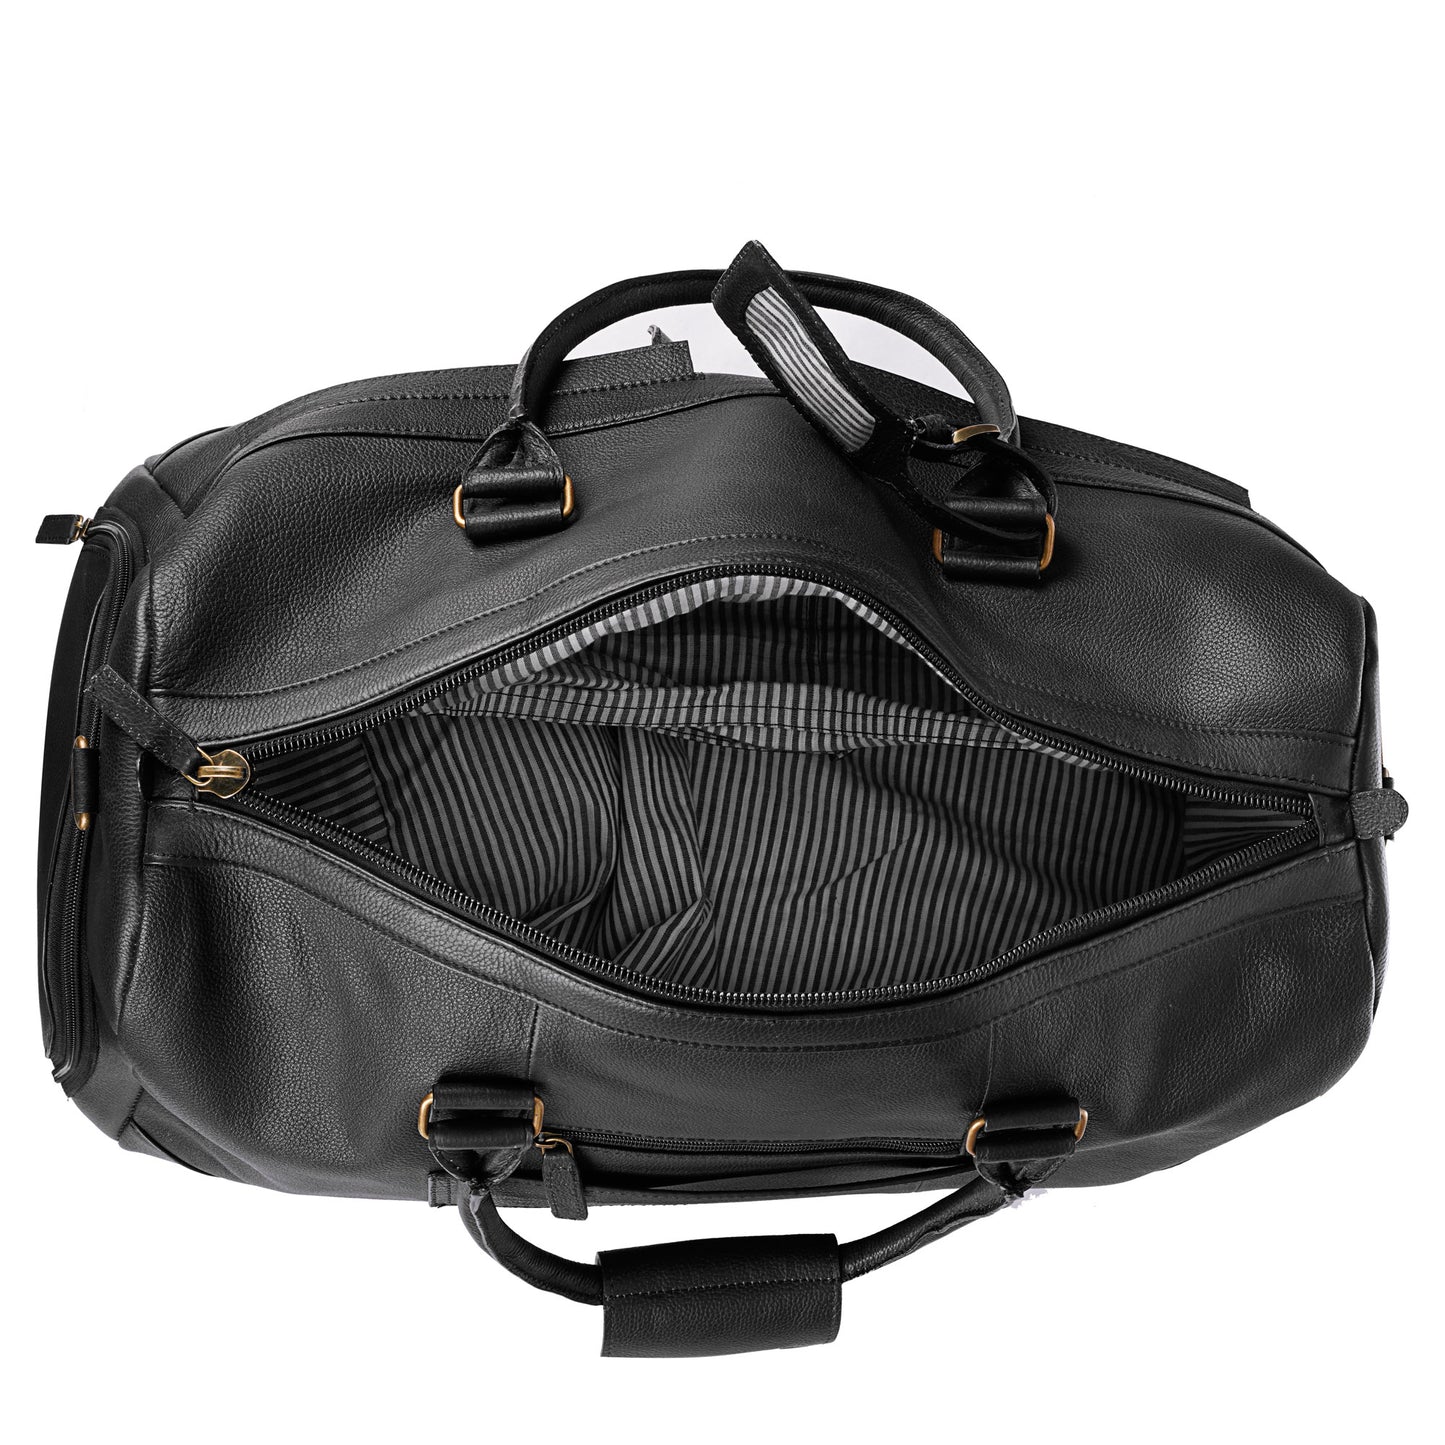 Geneva Leather Duffel Bag  ( with Shoe Compartment )